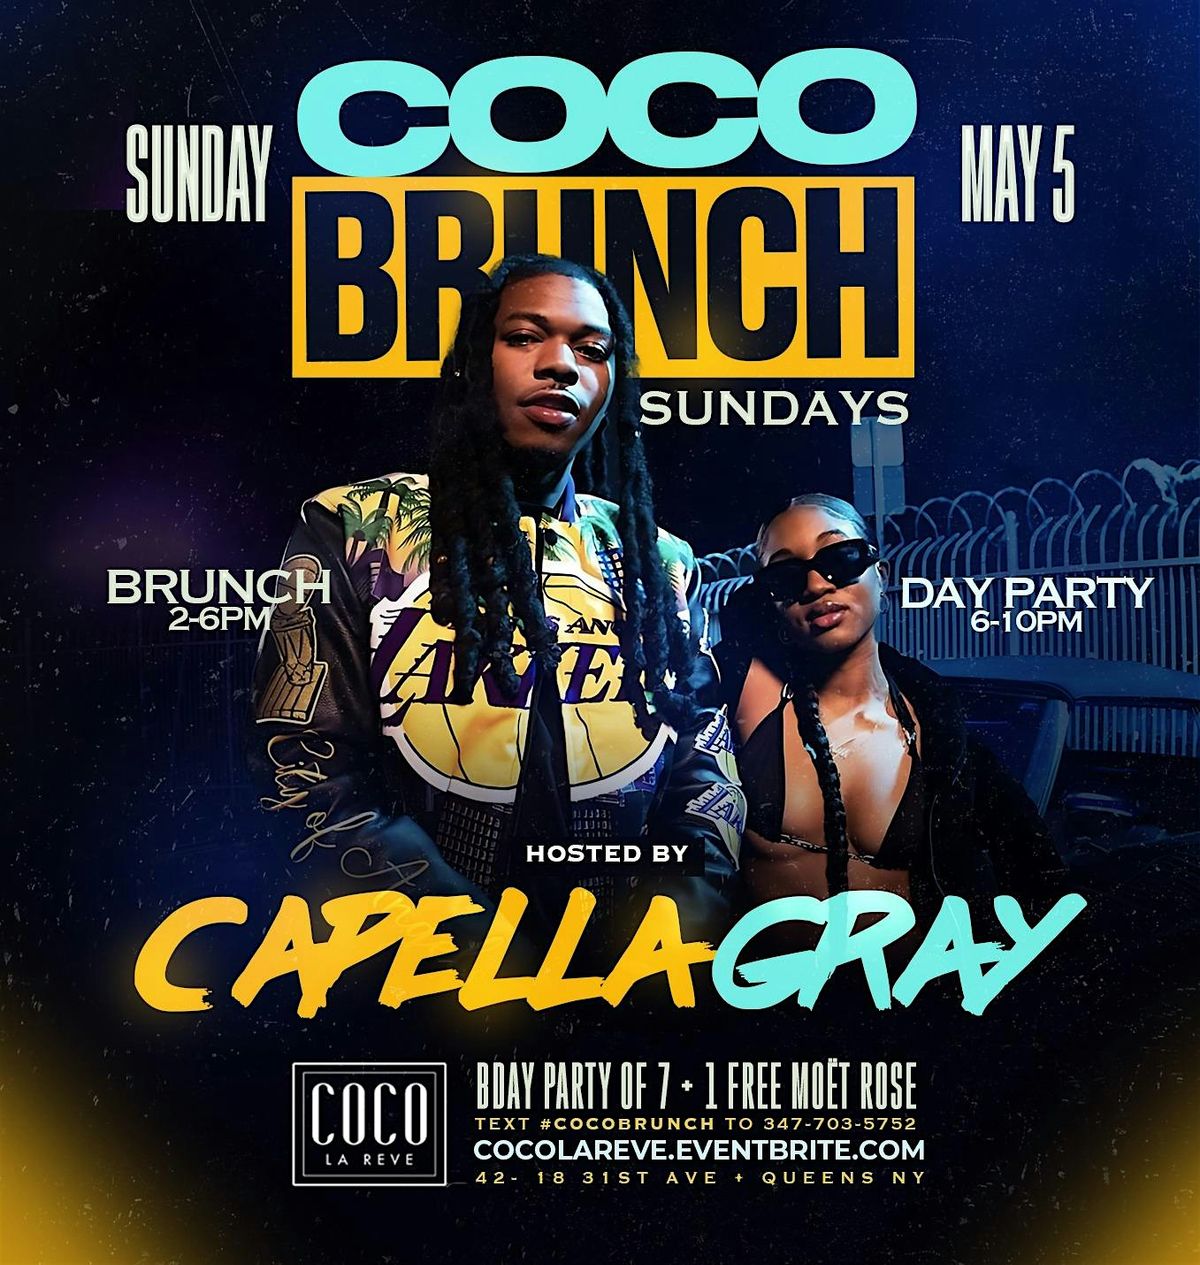 COCO SUNDAY BRUNCH HOSTED BY CAPELLA GRAY